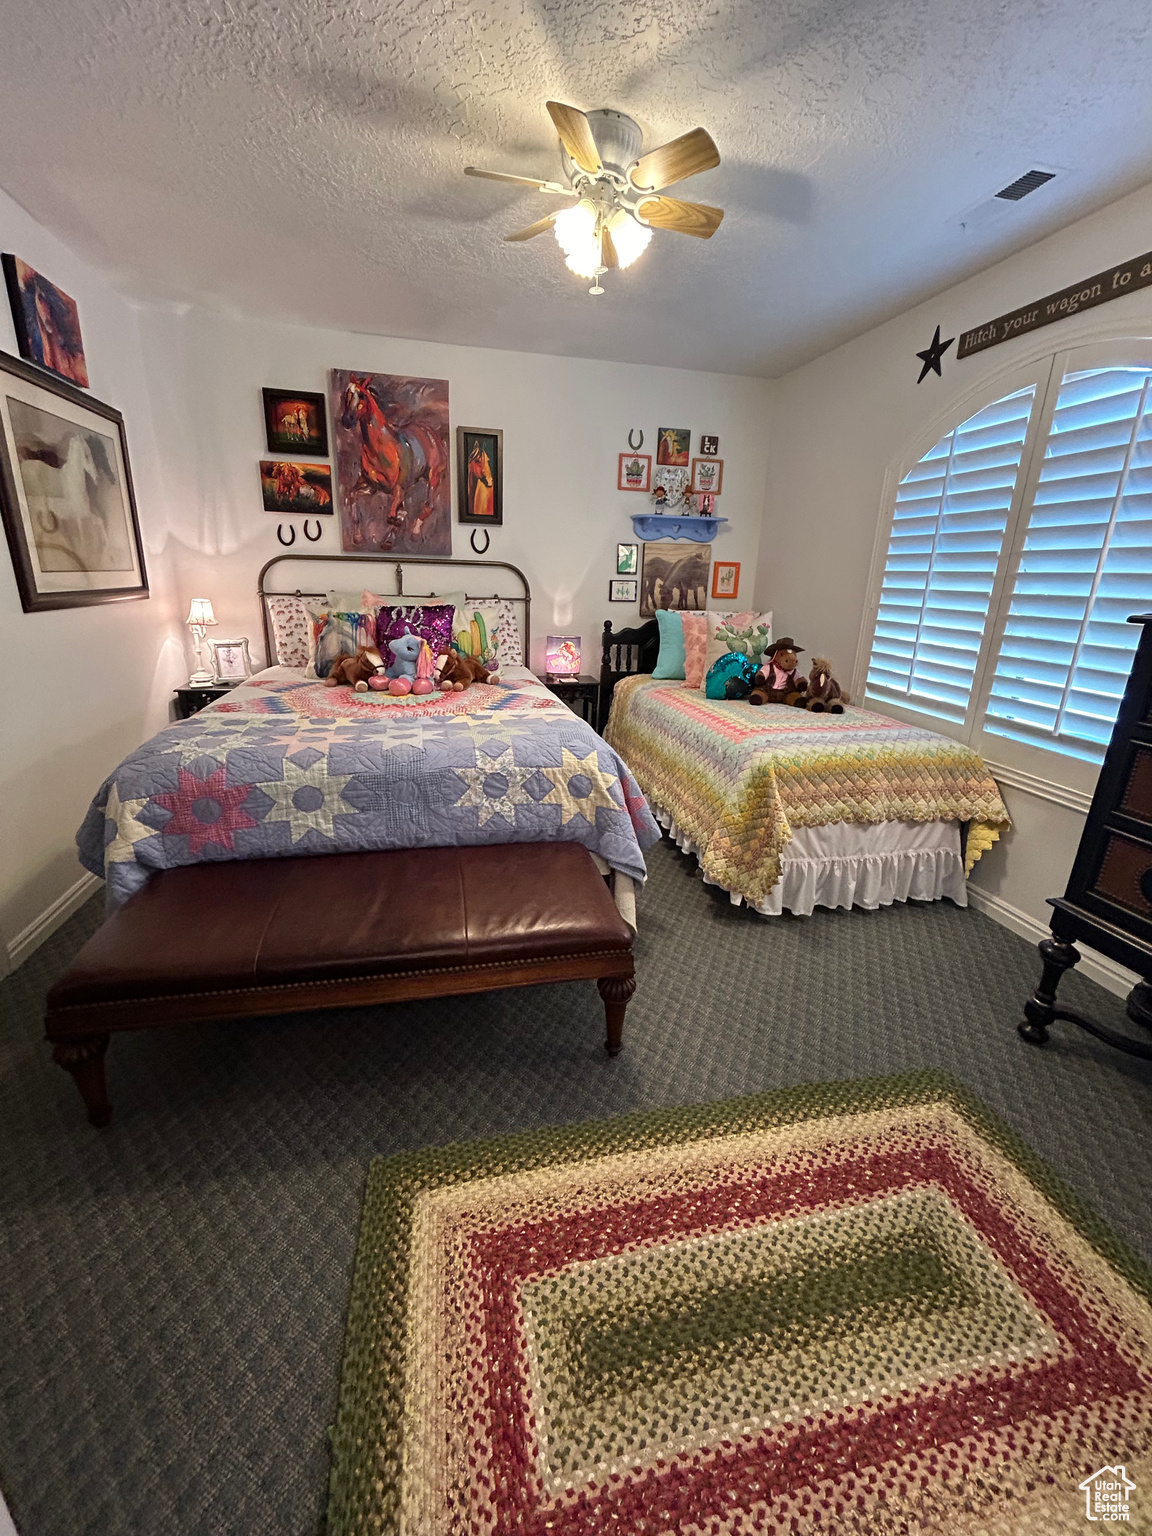 Bedroom with a textured ceiling, carpet floors, and ceiling fan